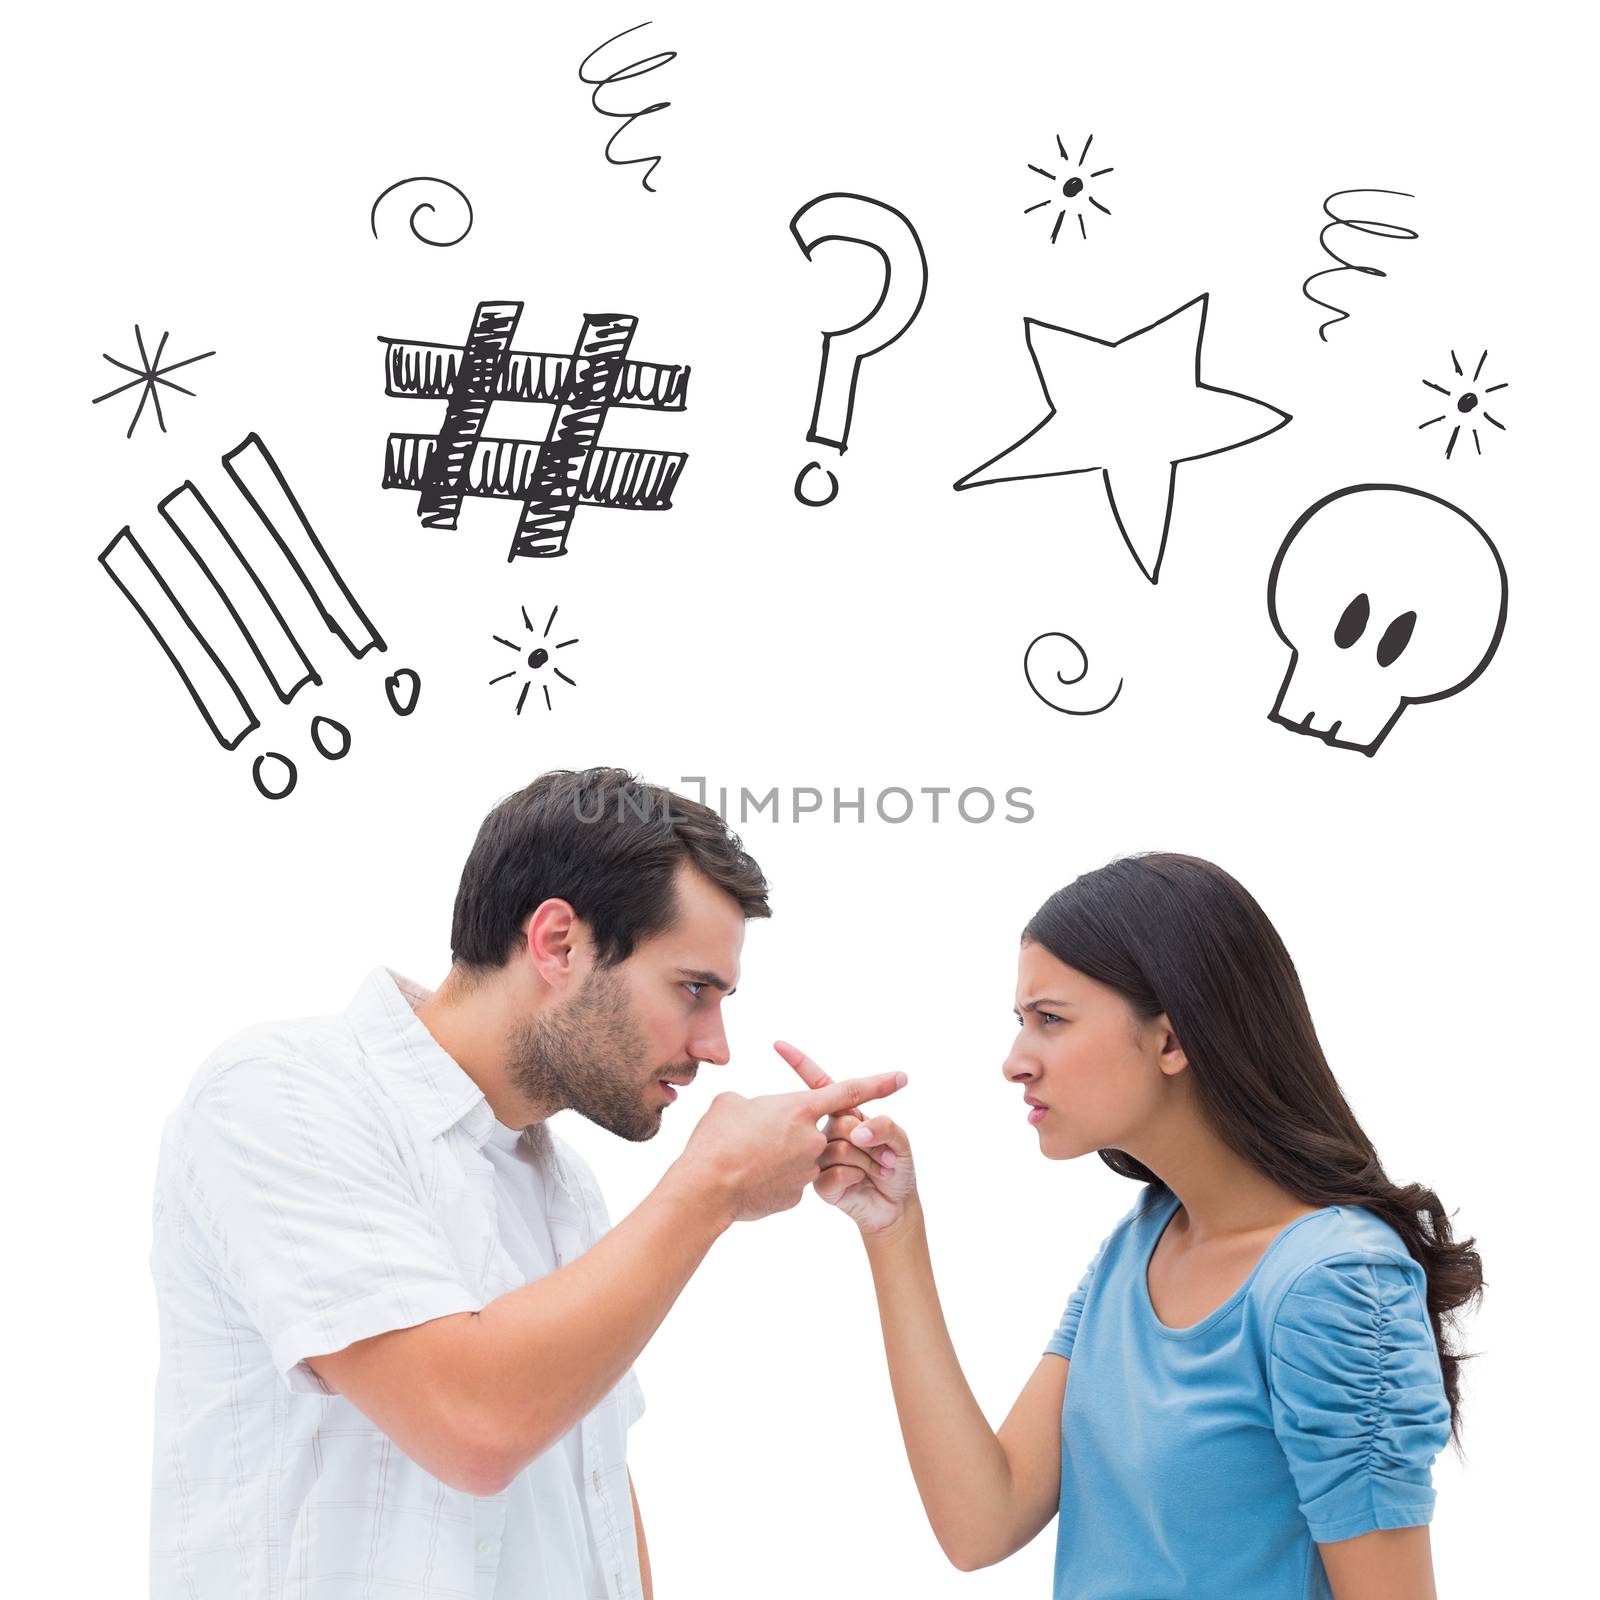 Angry couple pointing at each other against swearing doodles